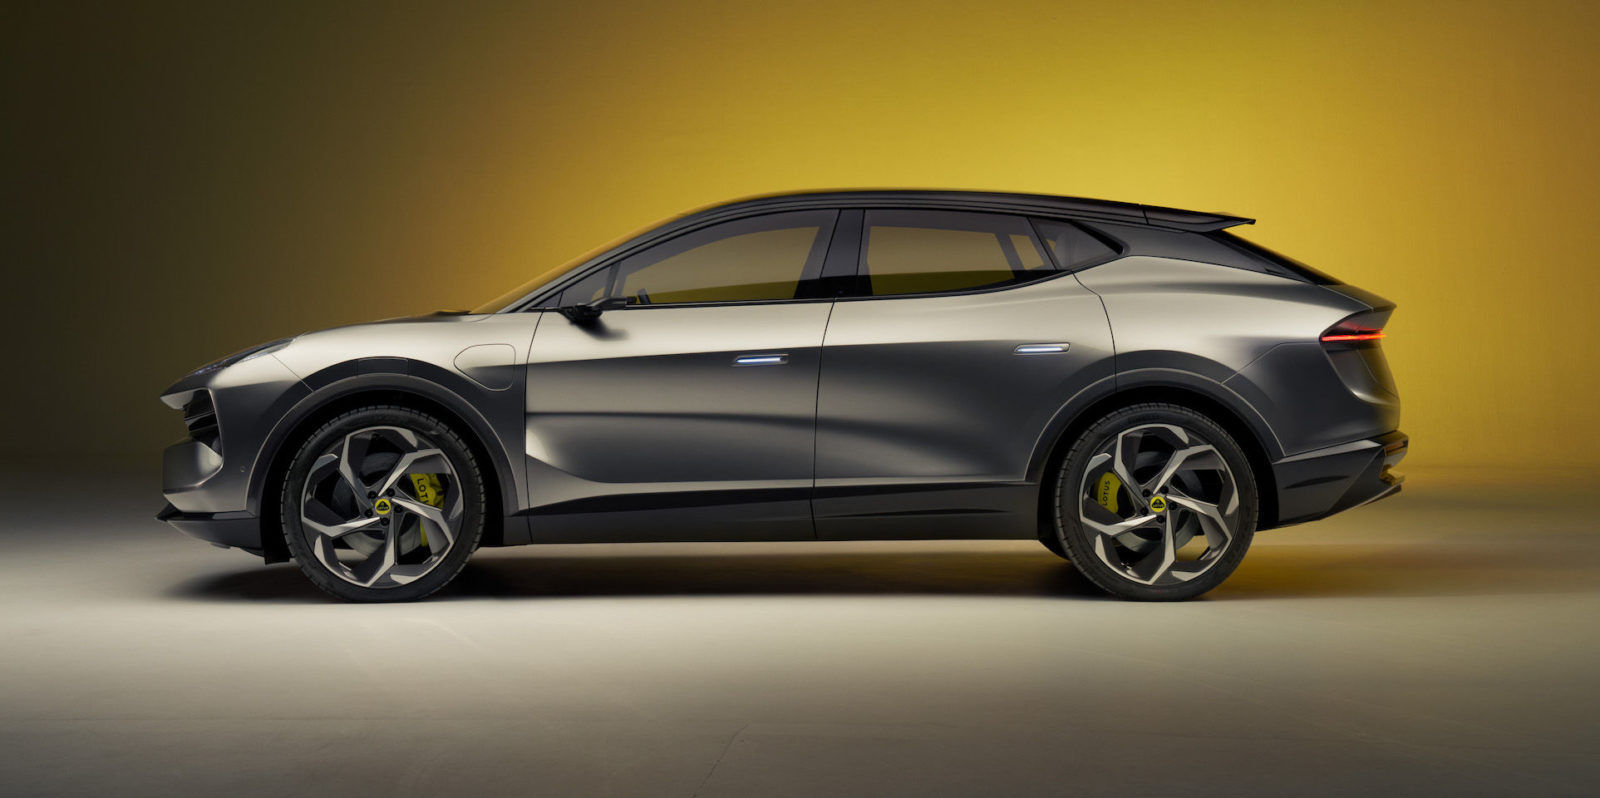 The world’s first electric hyper-SUV is here